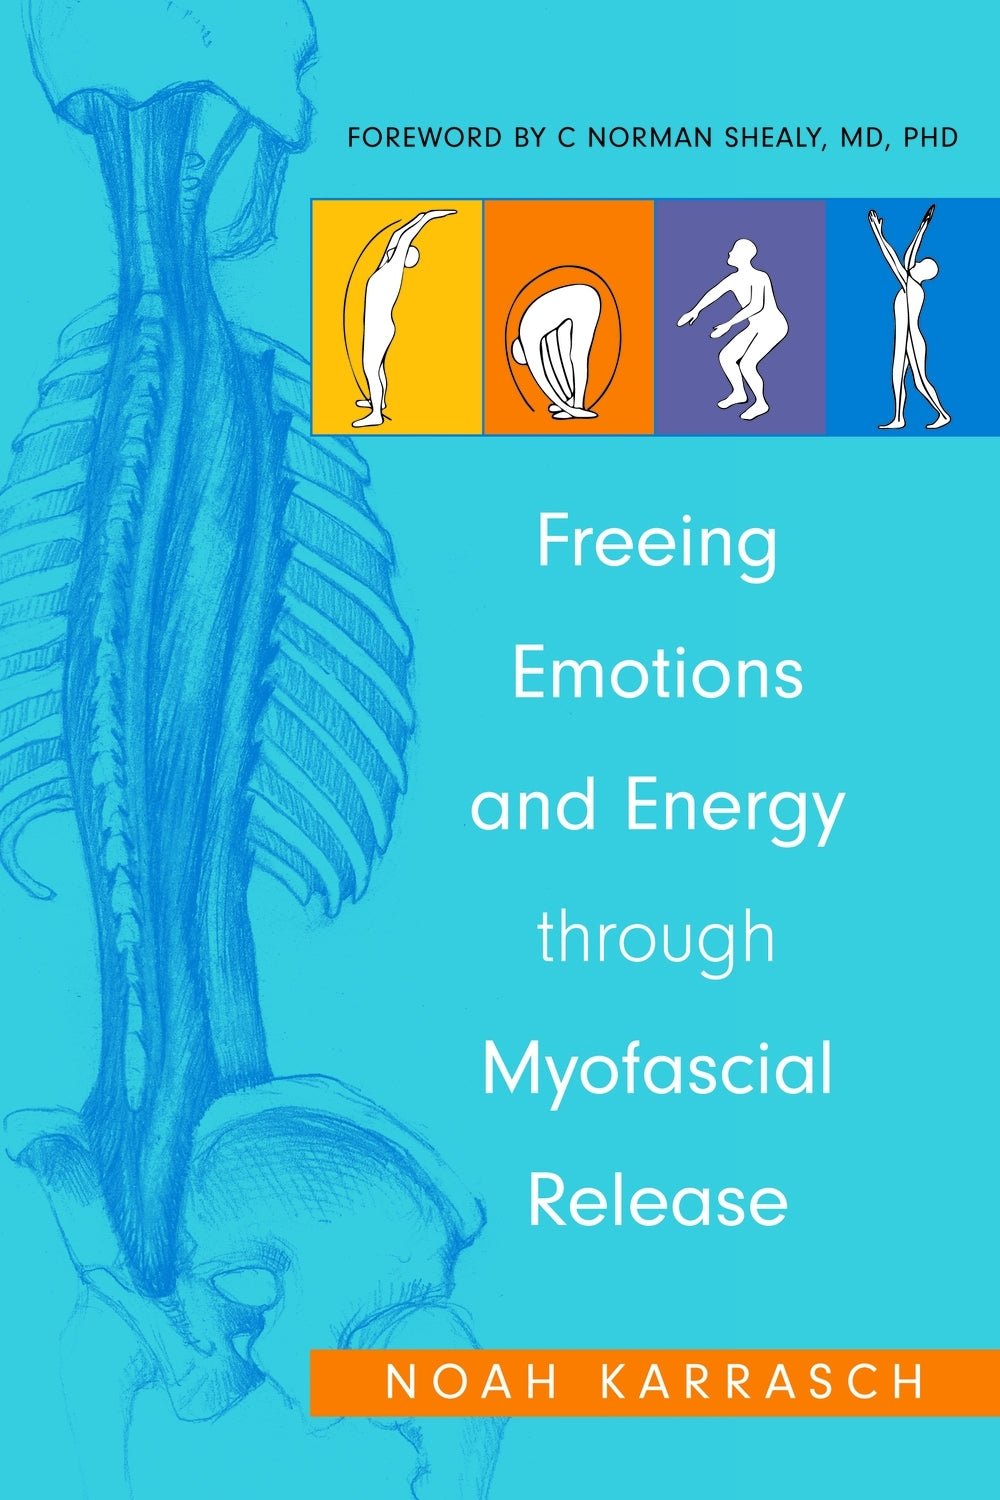 Freeing Emotions and Energy Through Myofascial Release by Amy Rizza, Noah Karrasch, C. Norman Shealy, Julie Zaslow